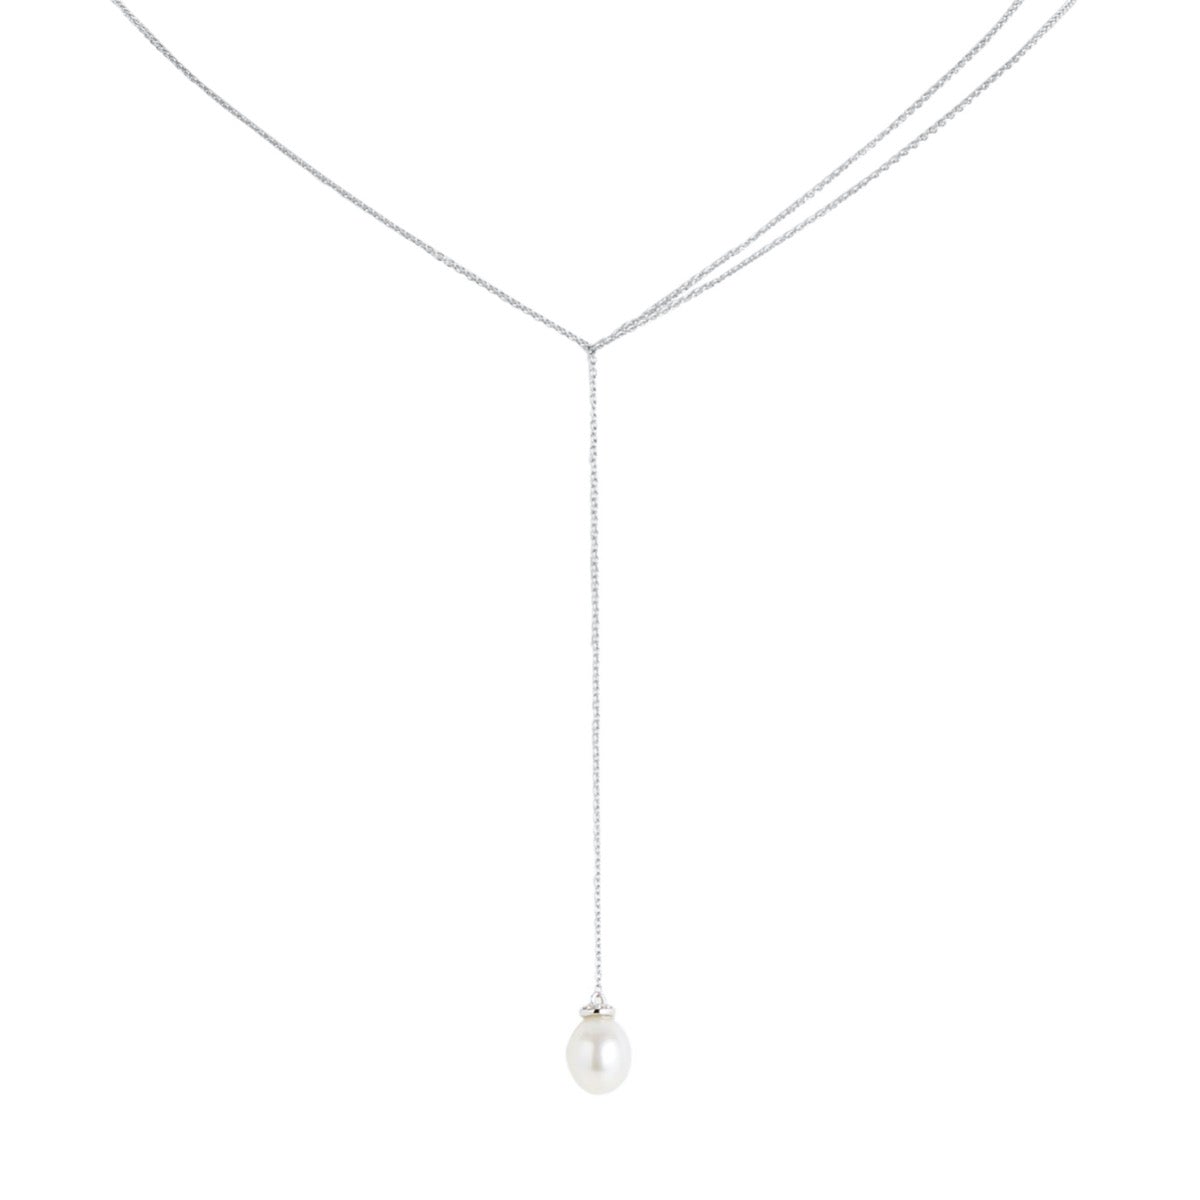 Gump's Signature White Pearl Drop Lanyard Necklace